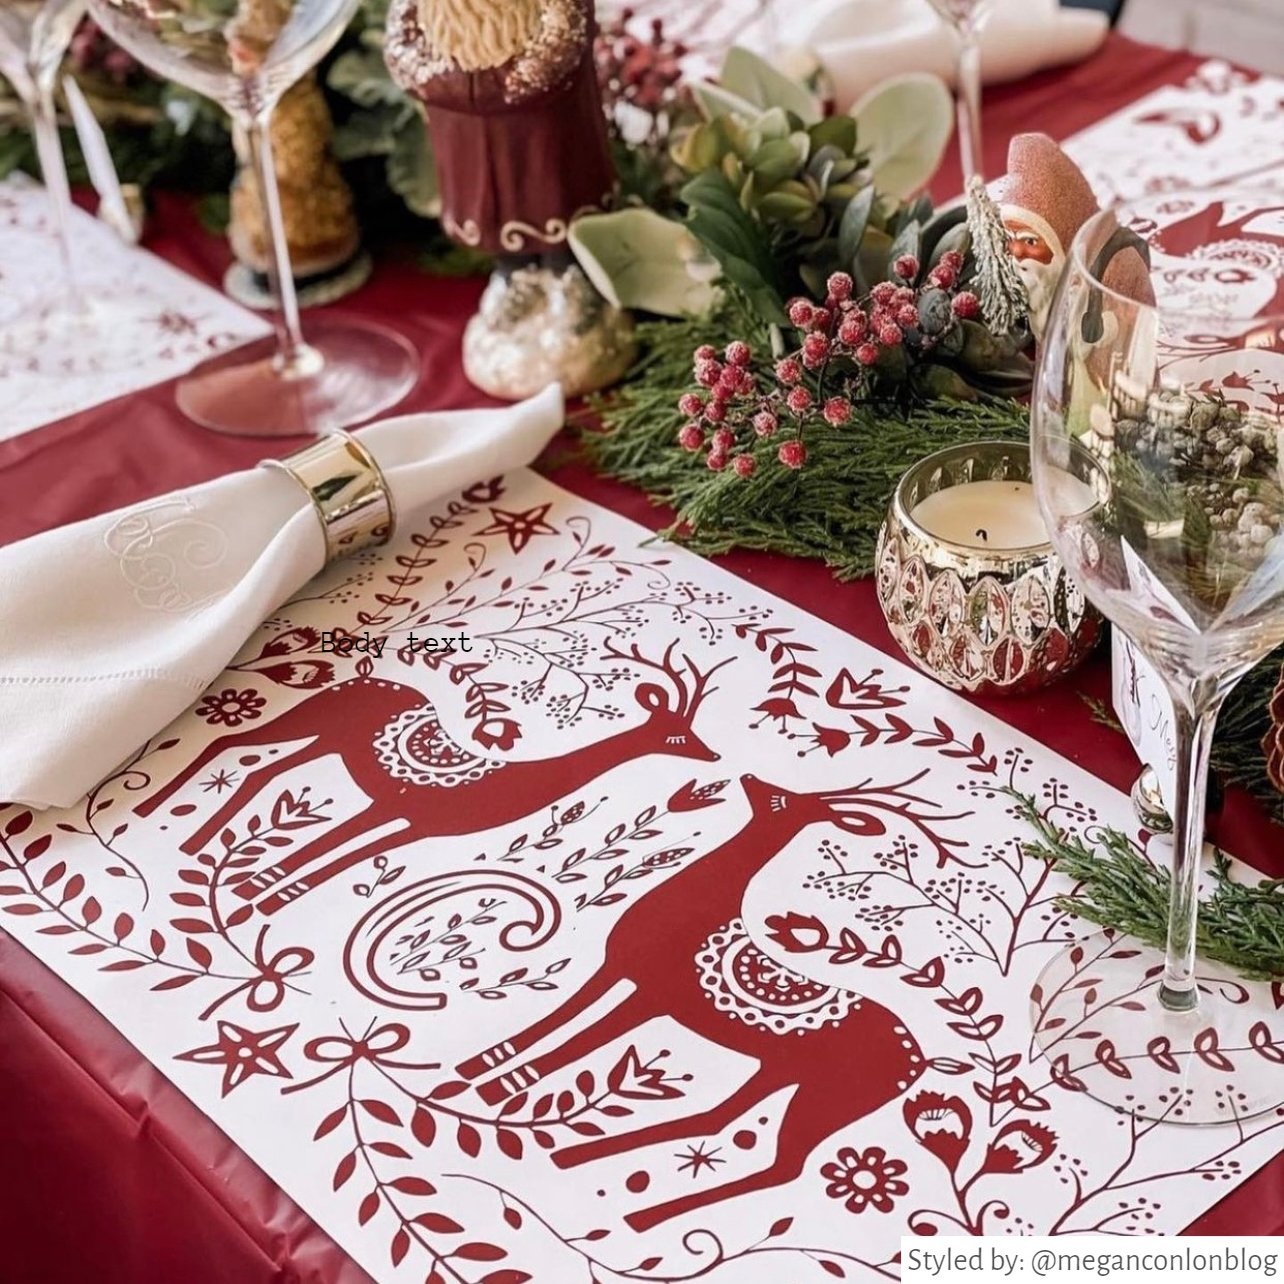 Table setting with red and white reindeer personalized paper placemat on a red tablecloth with various red and green Christmas table decor